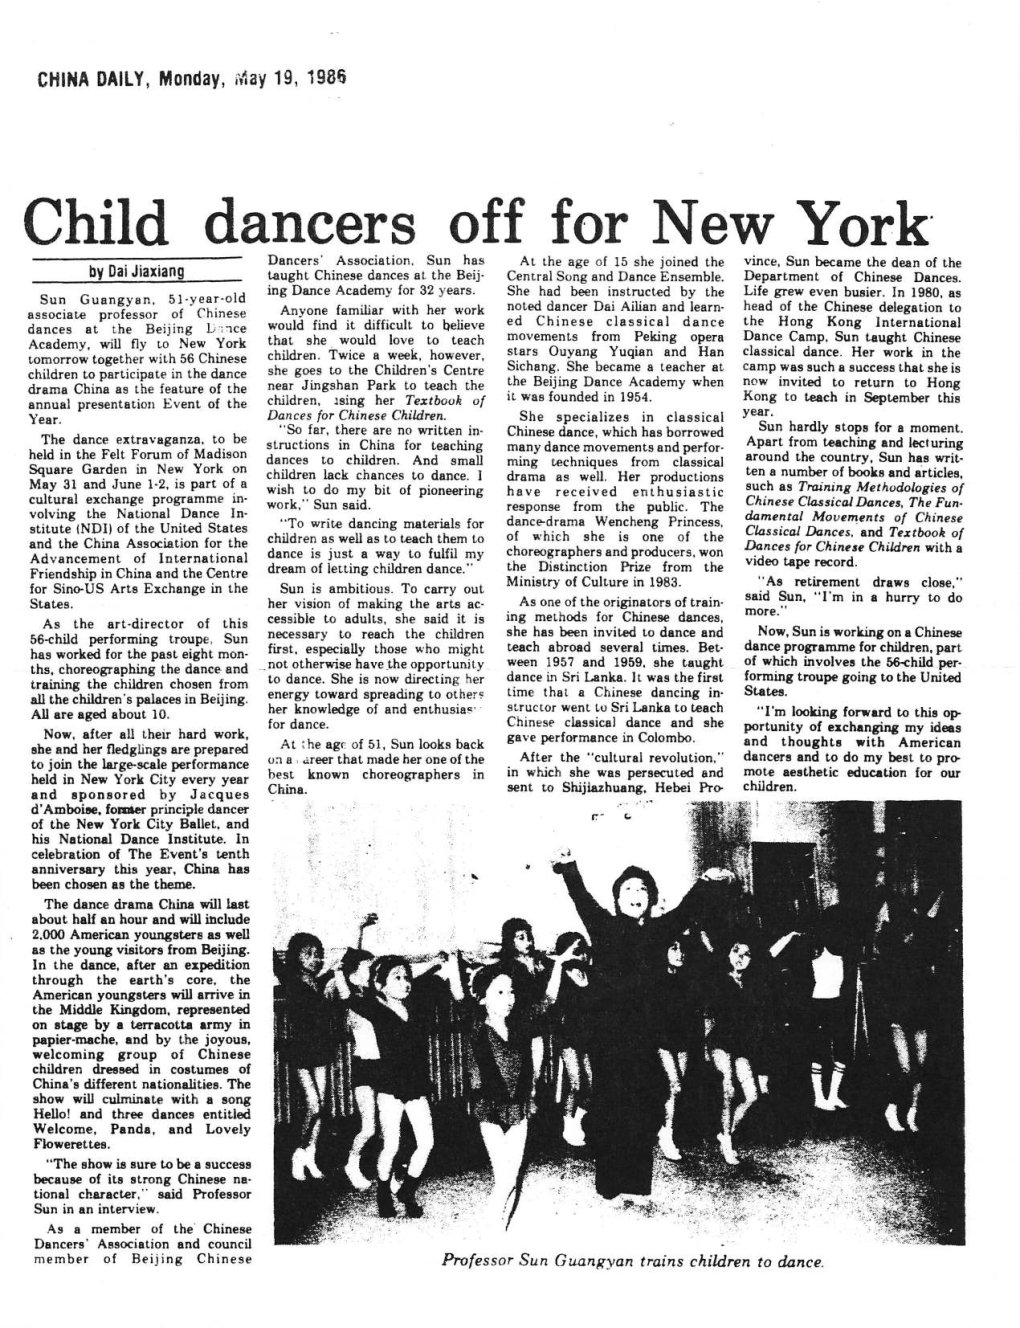 Child Dancers Off for New York